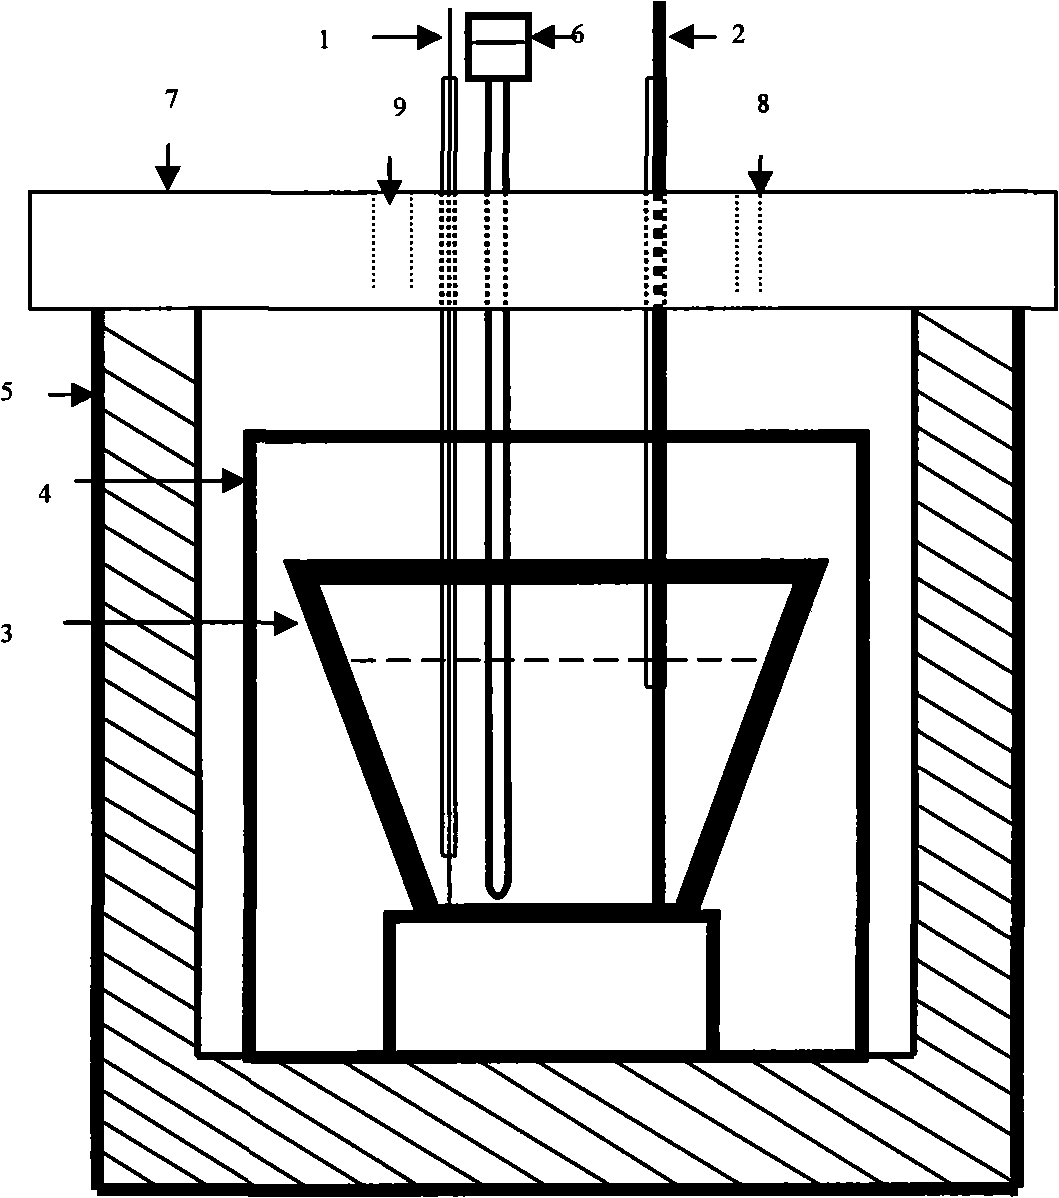 Mg-Li-Ho alloy, and fused salt electrolysis preparation and apparatus thereof